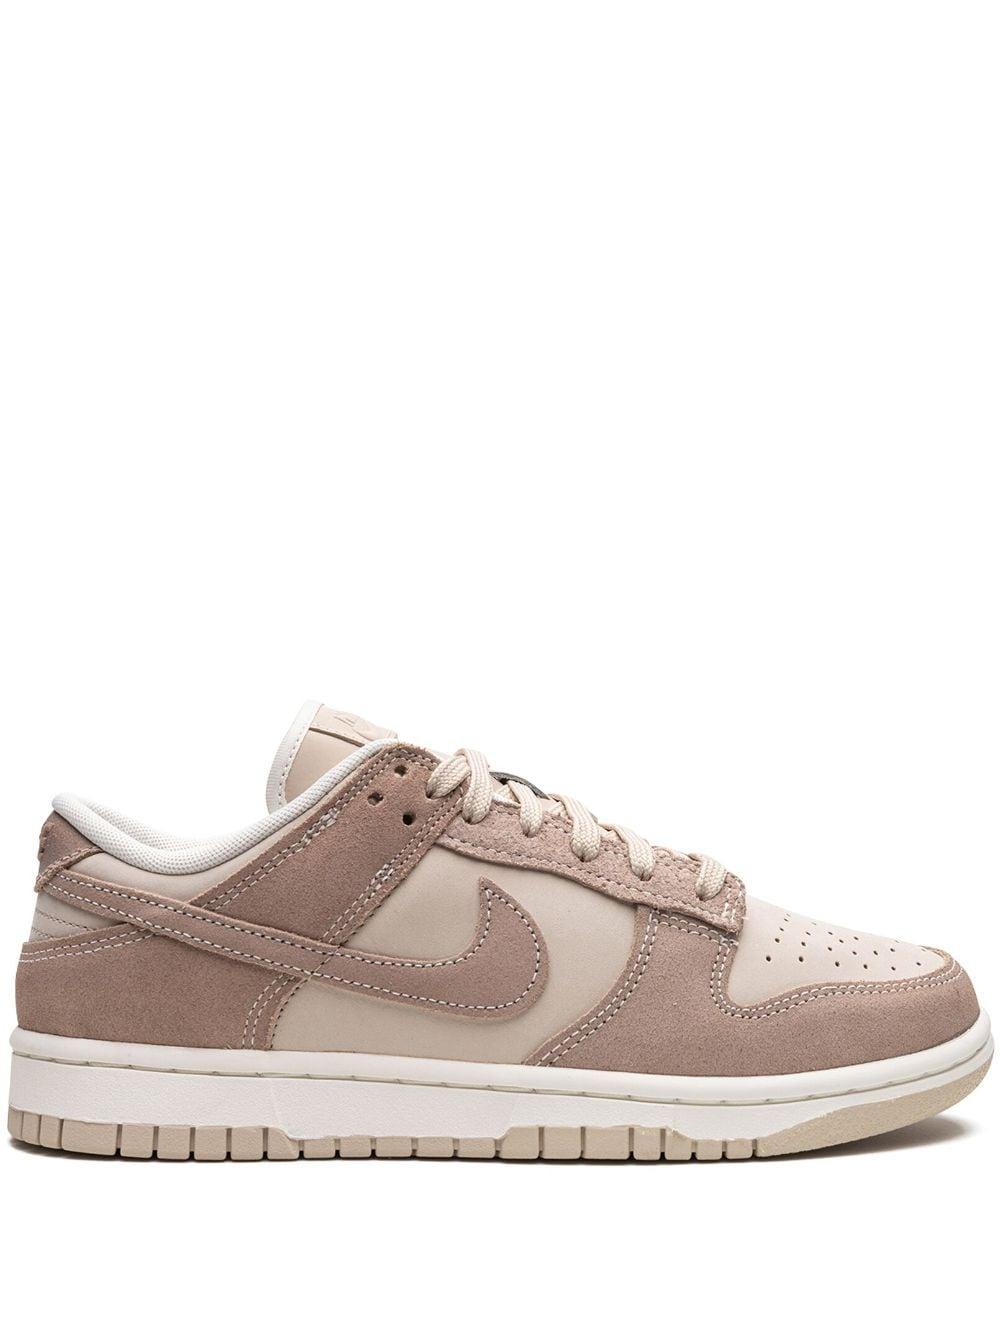 Nike Dunk Low "sanddrift" Shoes in Brown | Lyst